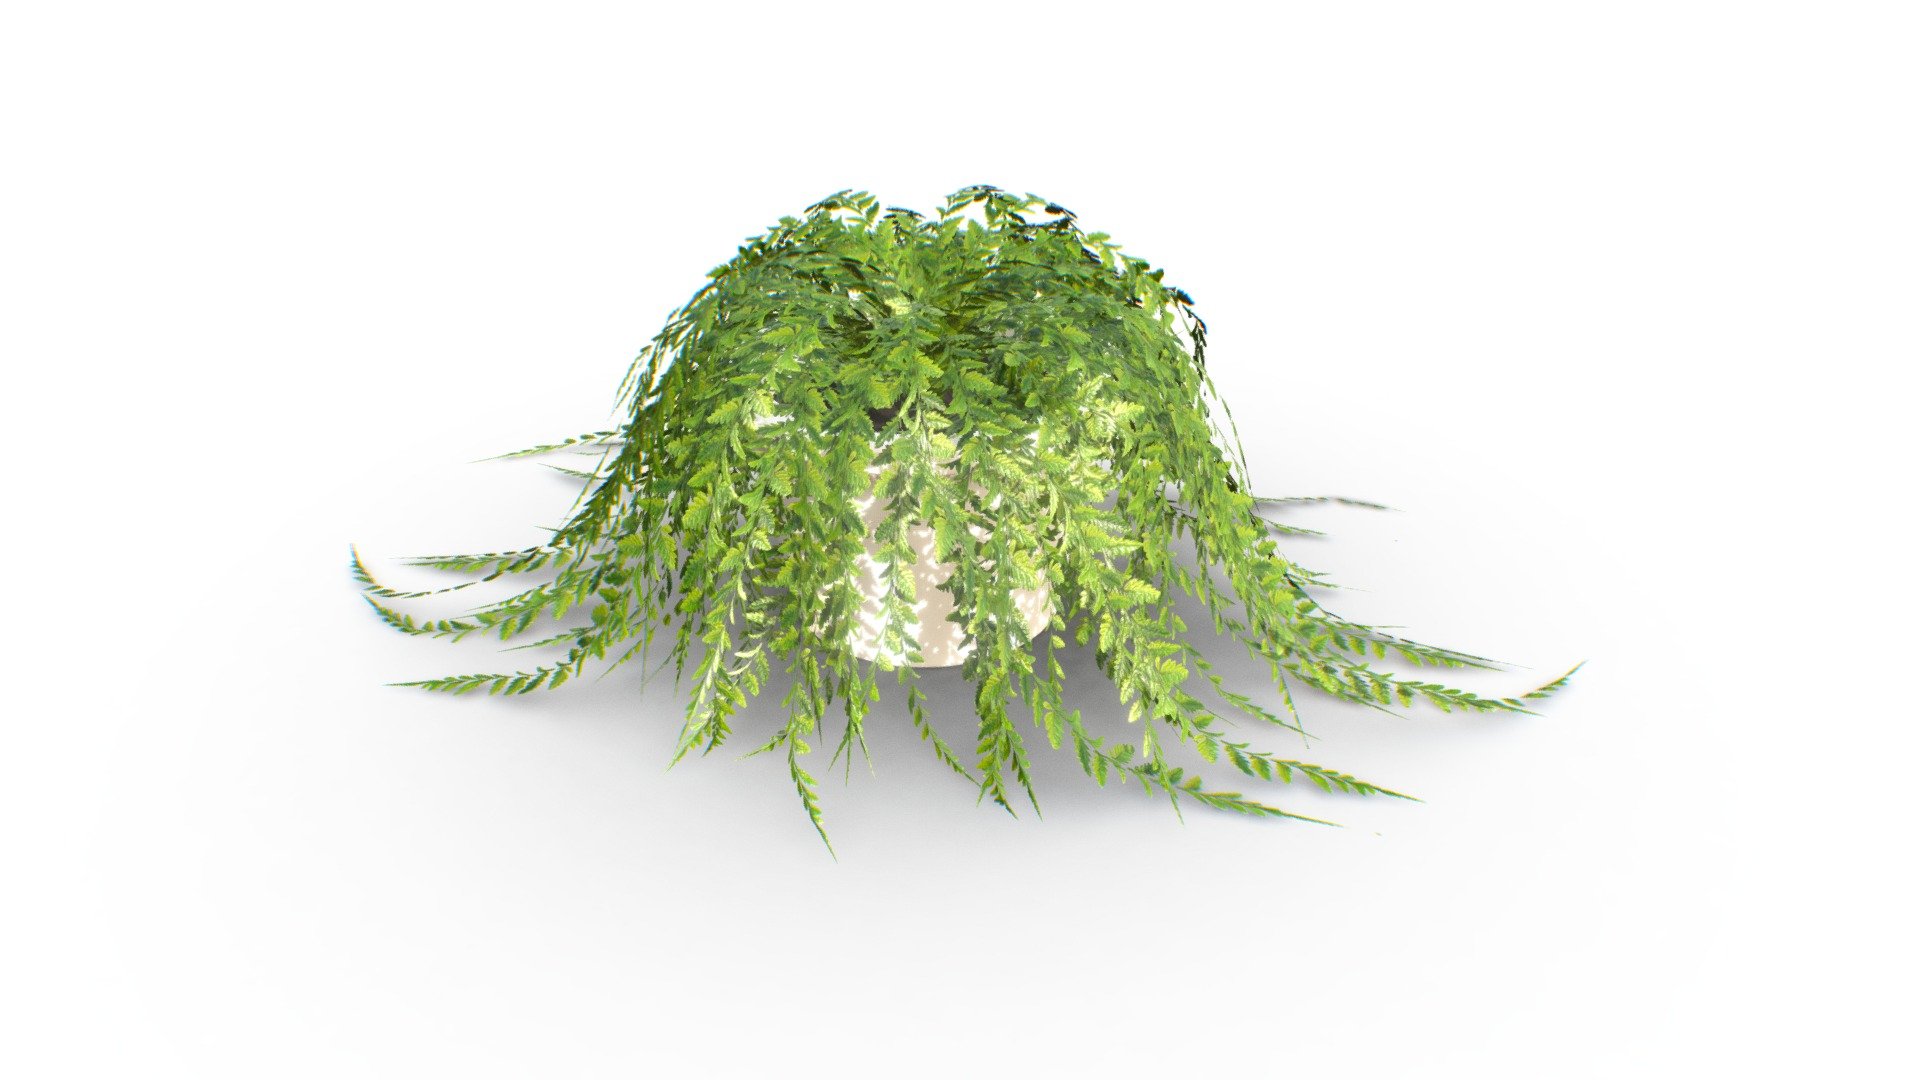 A smoothed-out version is displayed, low-poly version (7k verts) is included in the additional files.

PBR textures, rendering and game-ready.

Fern plant, with resting leaves, resting on the ground.

Fern can also be known as Polypodiopsida  or Polypodiophyta
Fun fact - they reproduce via spores, not flowers, unlike almost every other plant 3d model